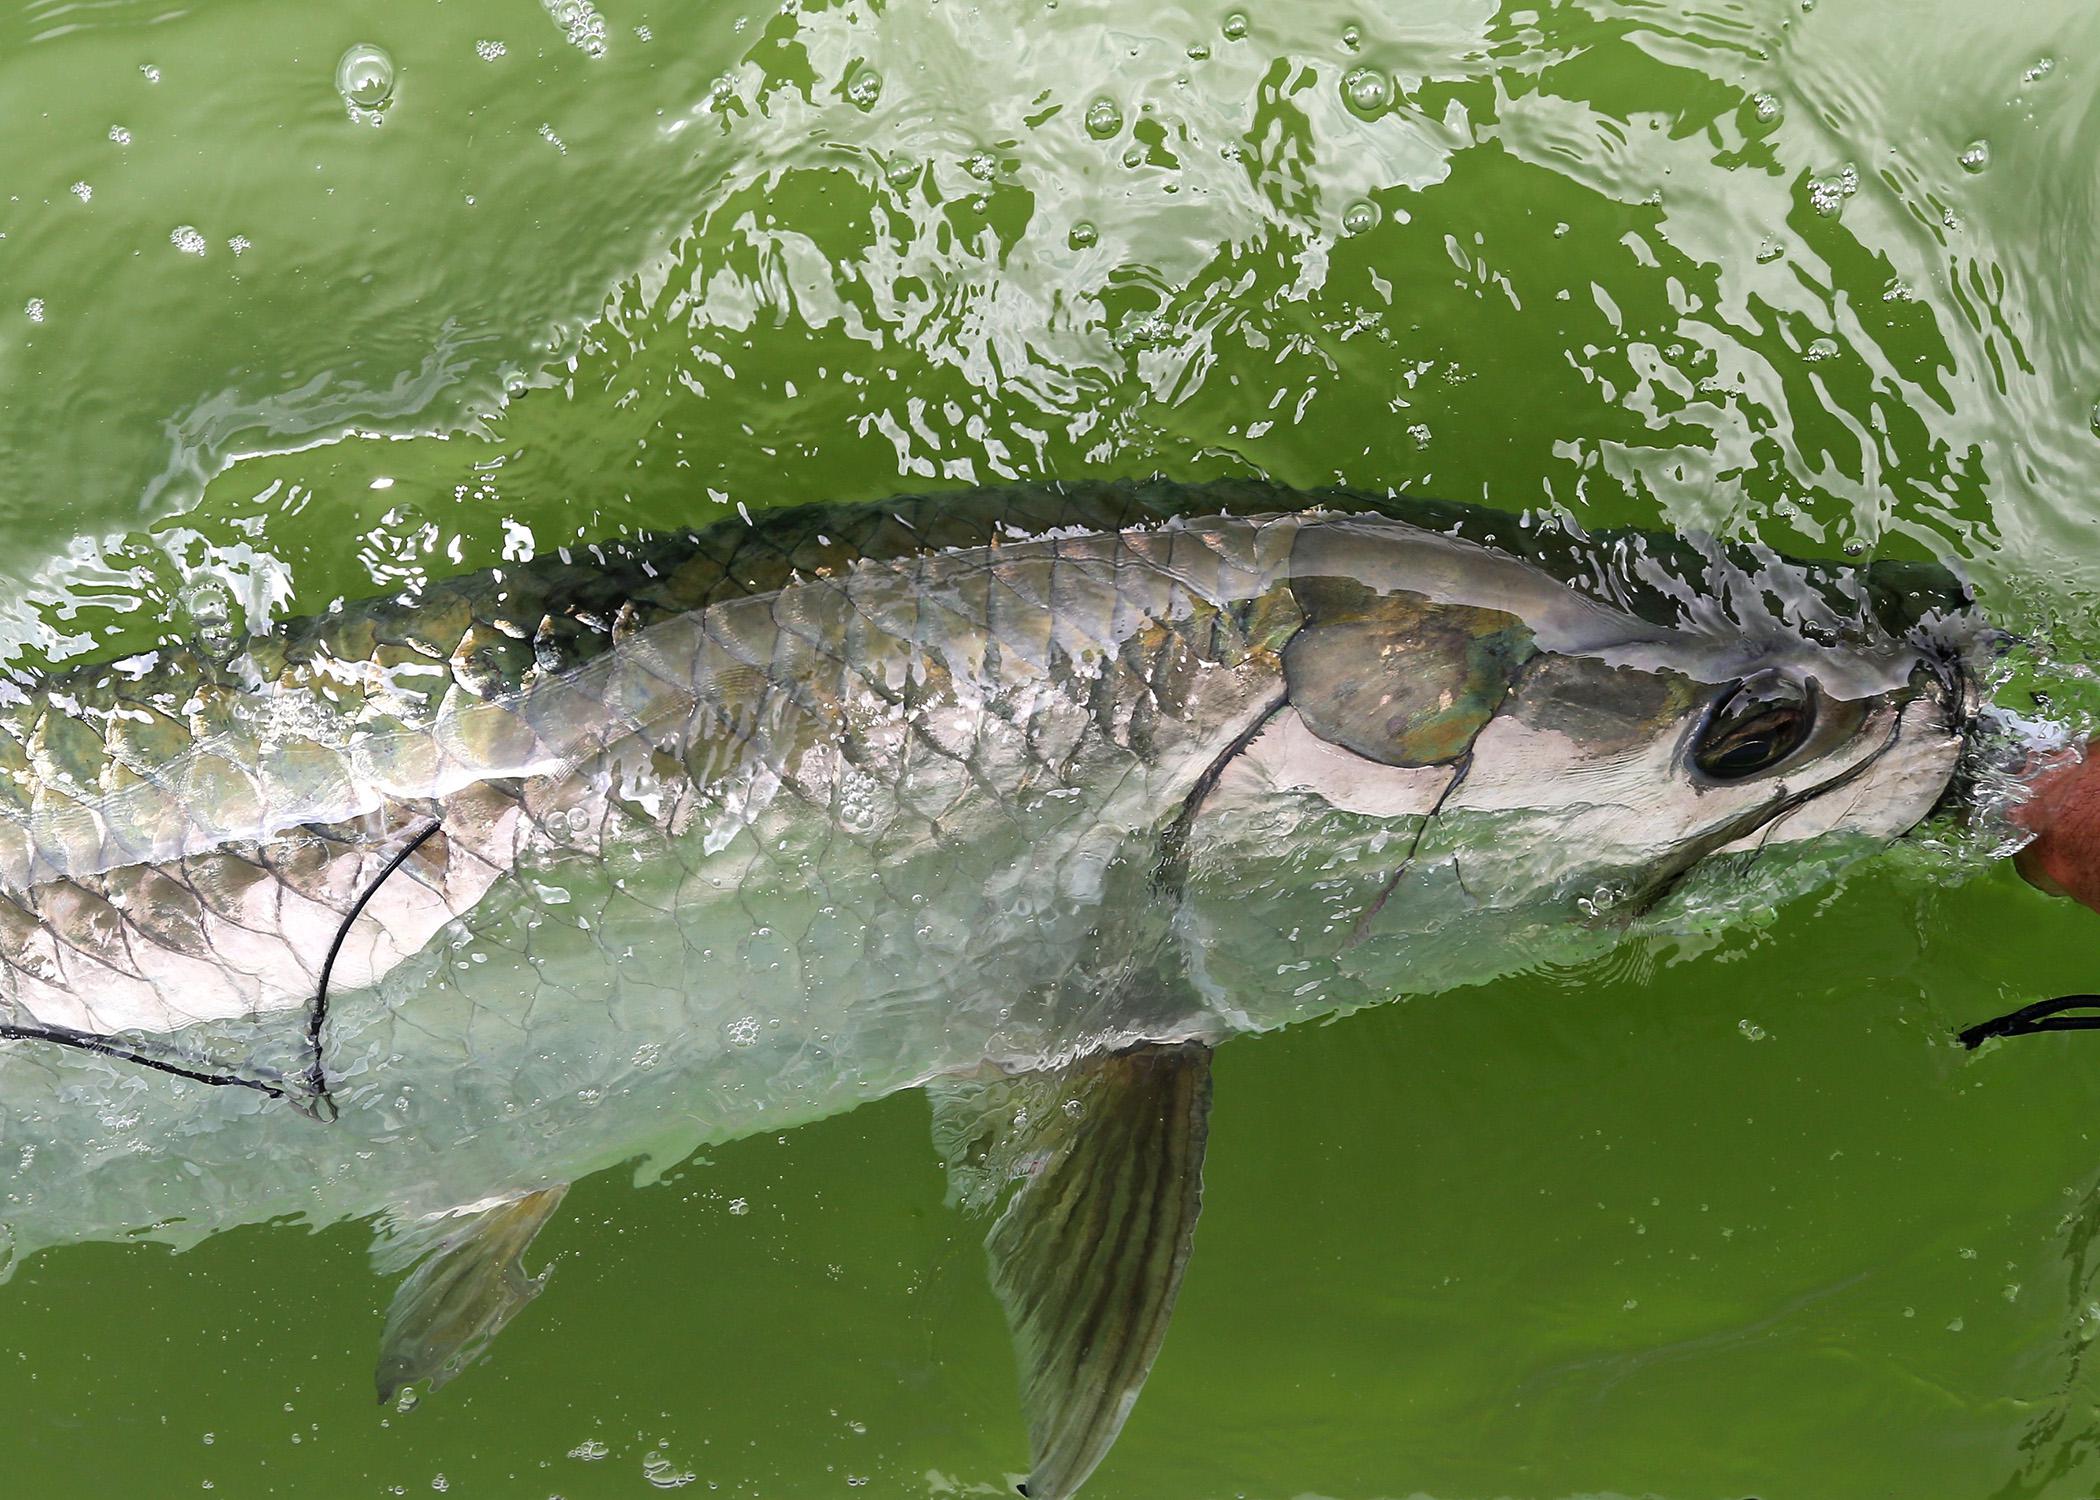 A silver fish is released into green water.